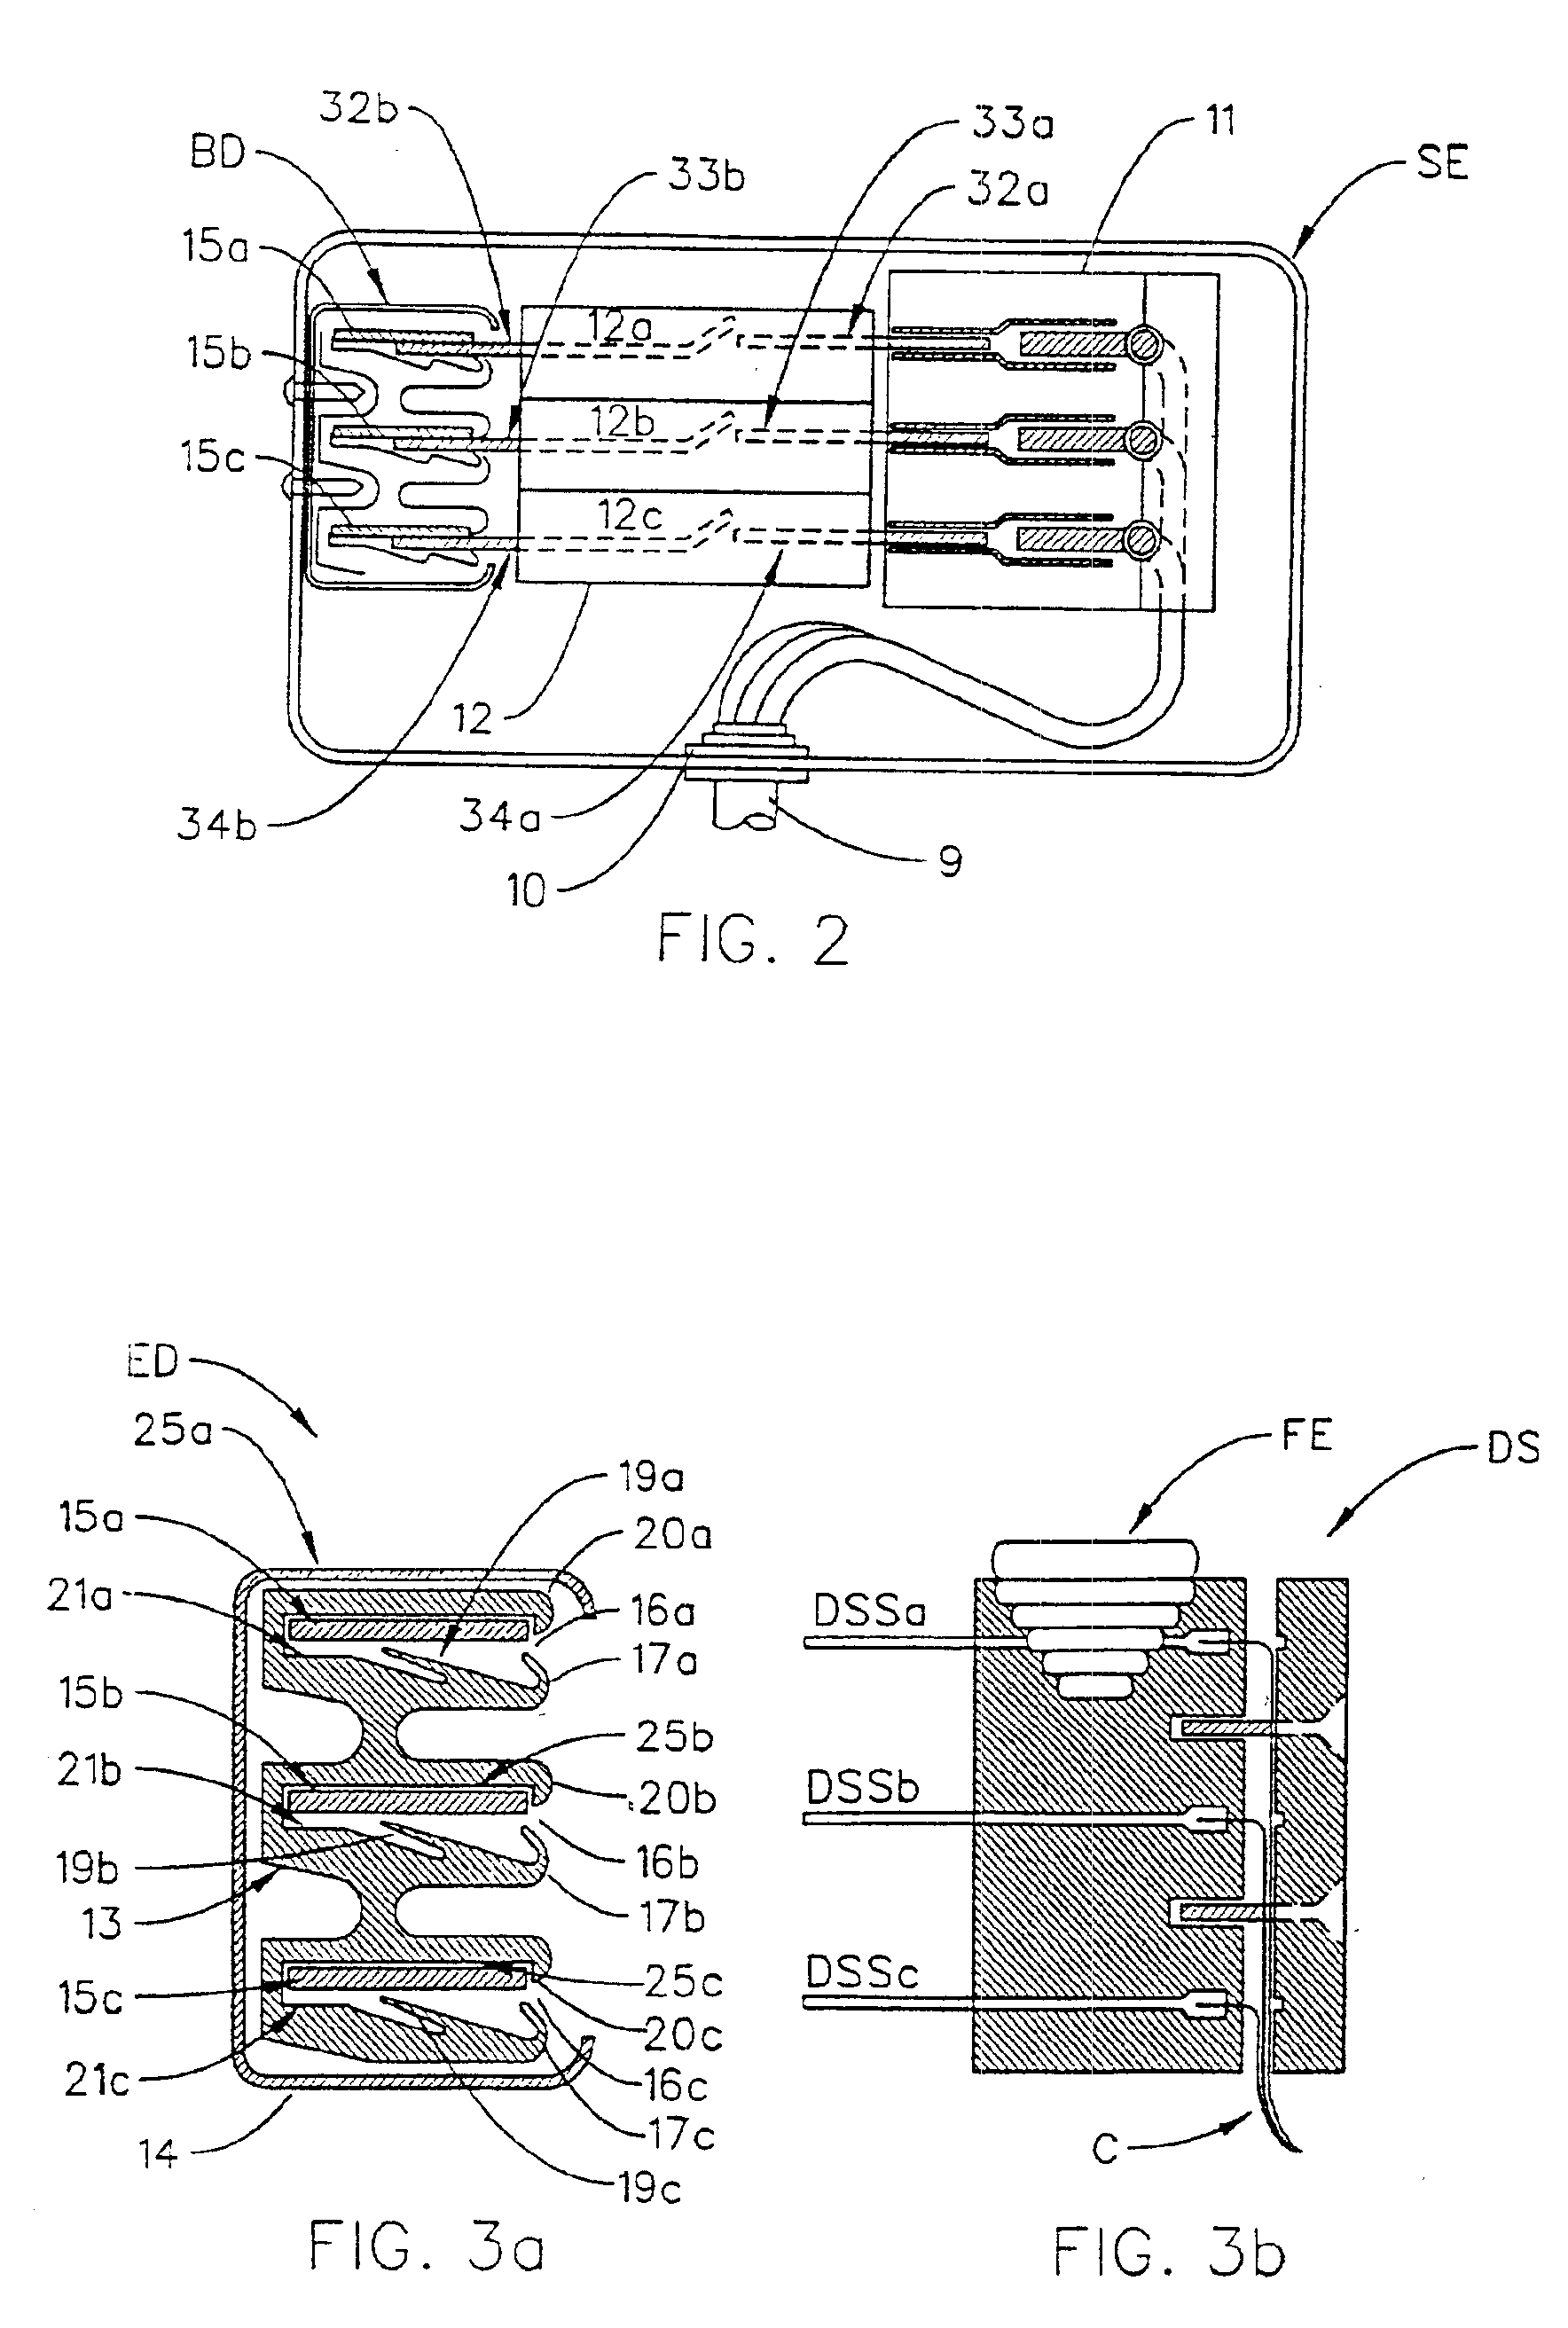 Polarized receptacle containing baseboard in reduced cable requiring system and method for providing electrical energy to houses and buildings and the like